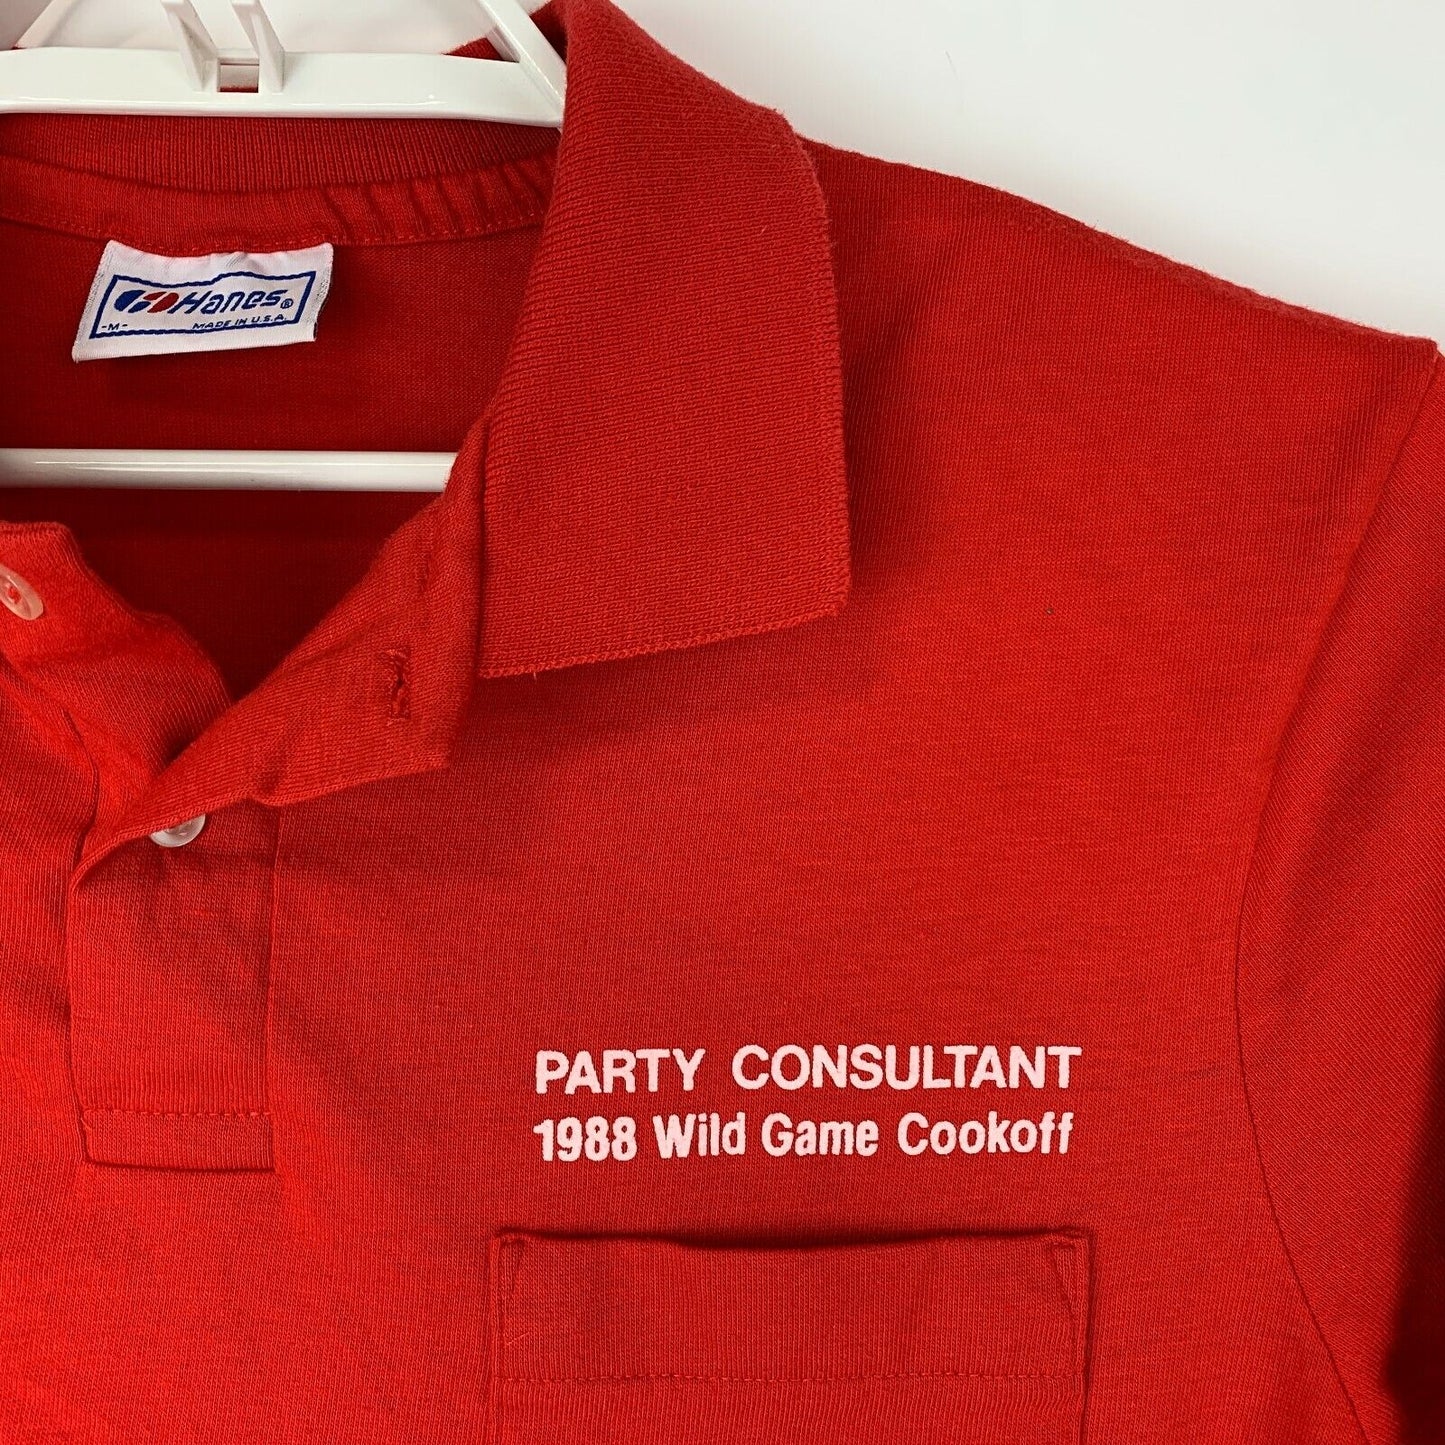 Wild Game Cookoff Party Consultant Vintage 80s Polo T Shirt Made In USA Medium